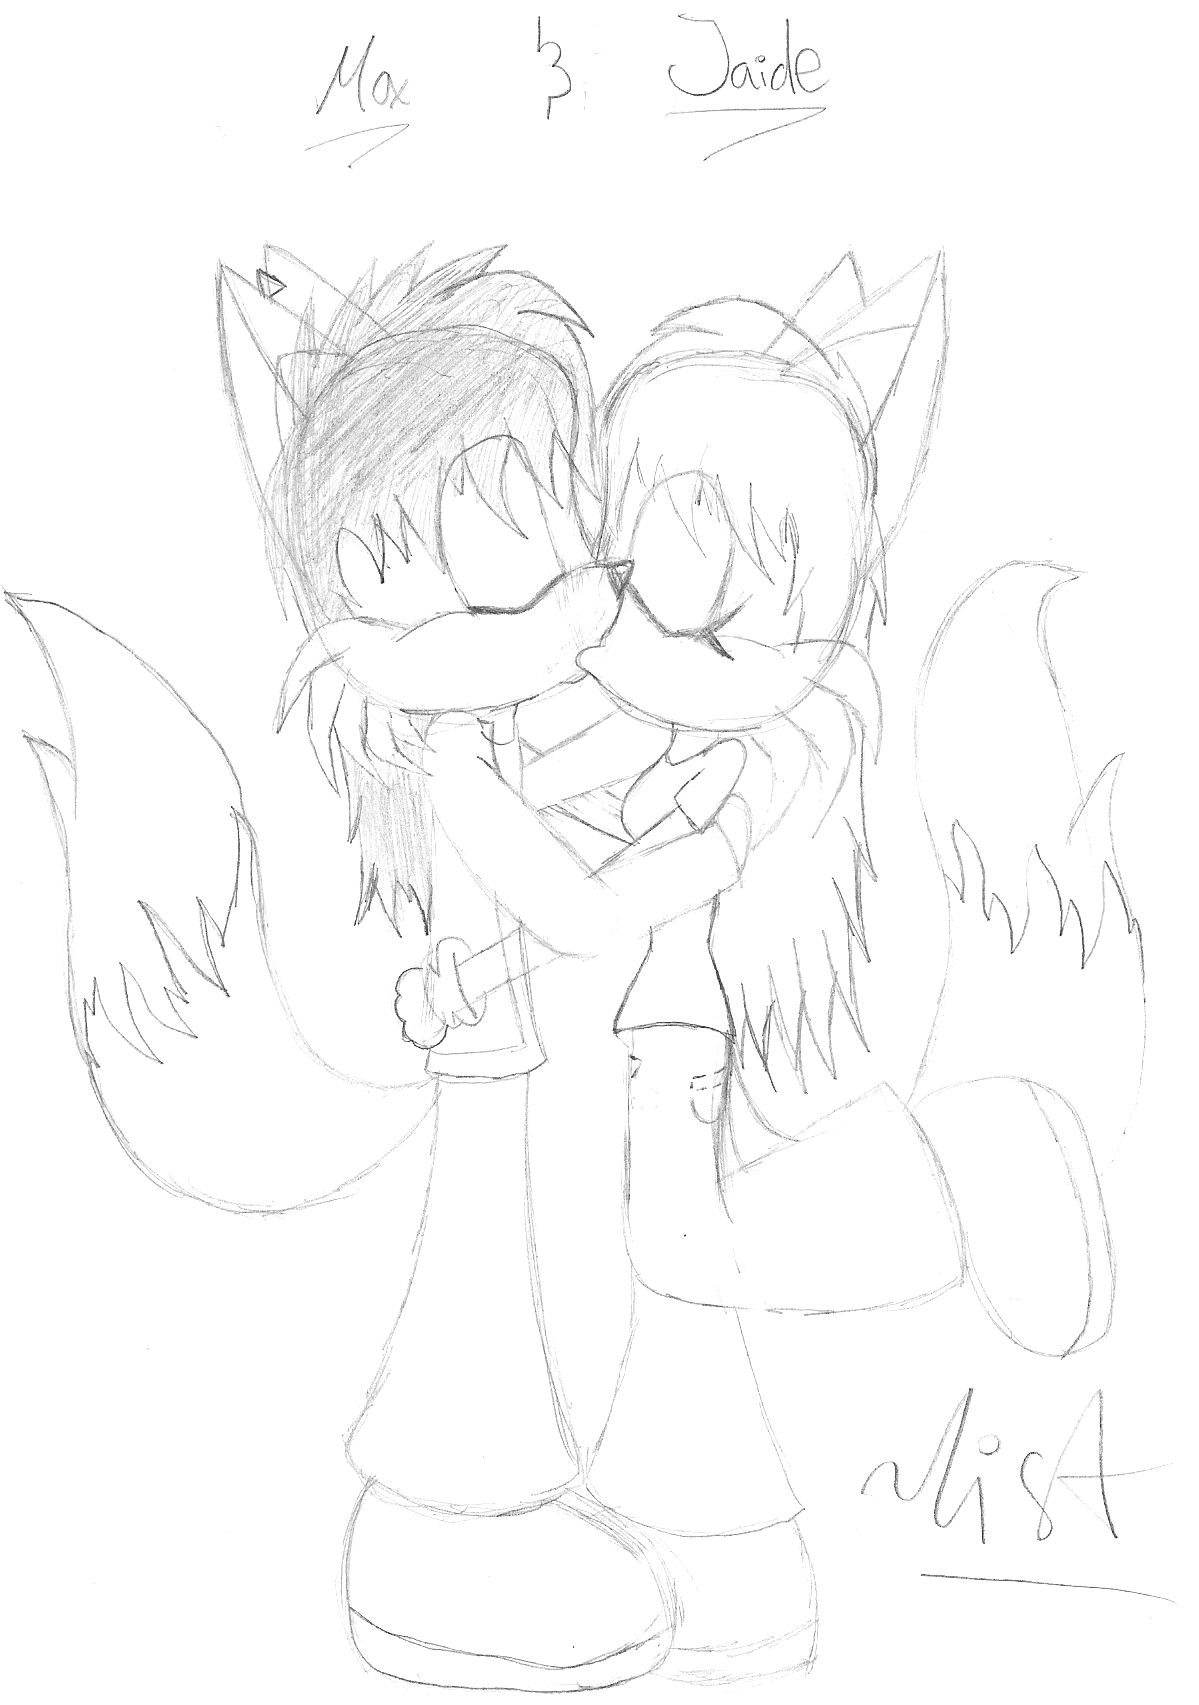 Max and Jaide: A sweet Kiss -sketch- by Max2085